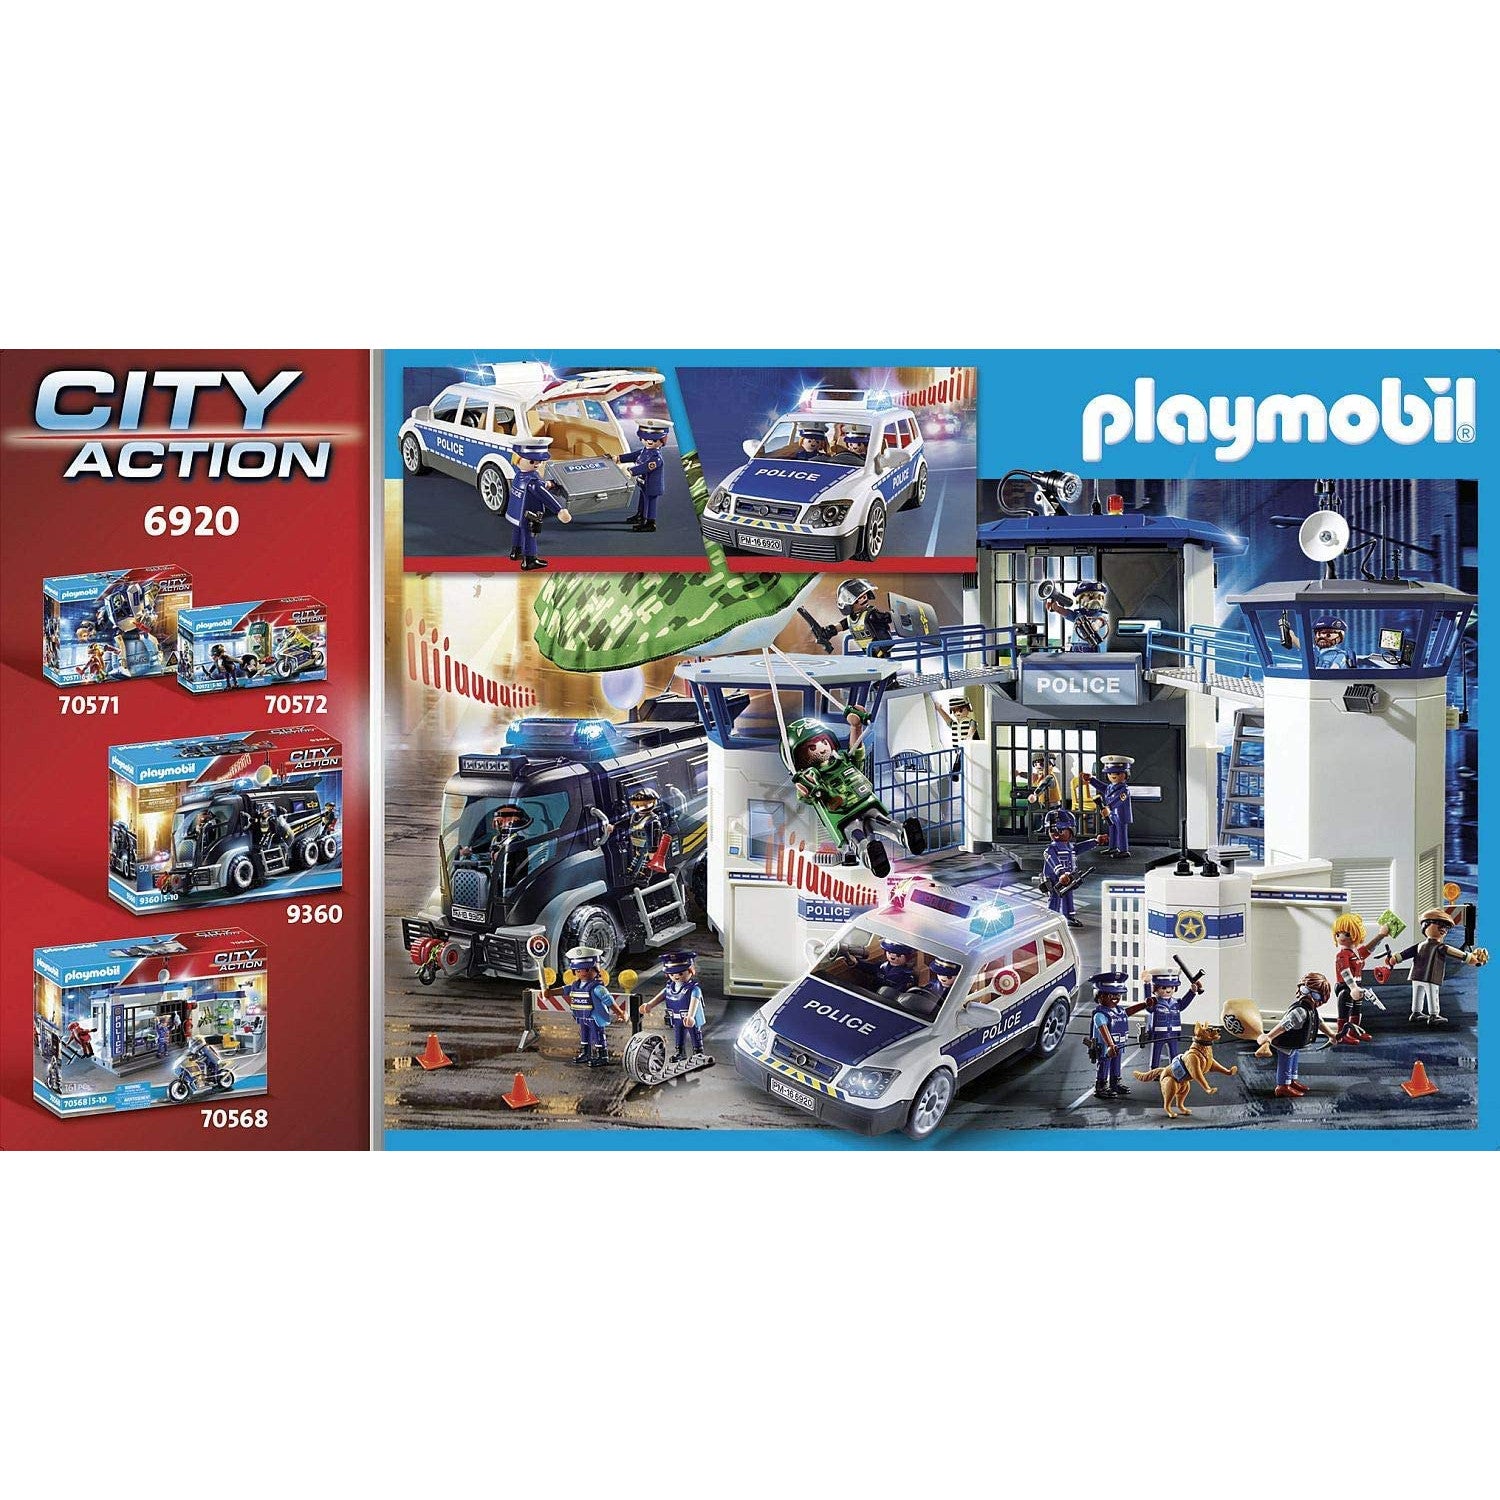 Playmobil Police Car with Lights and Sound 4